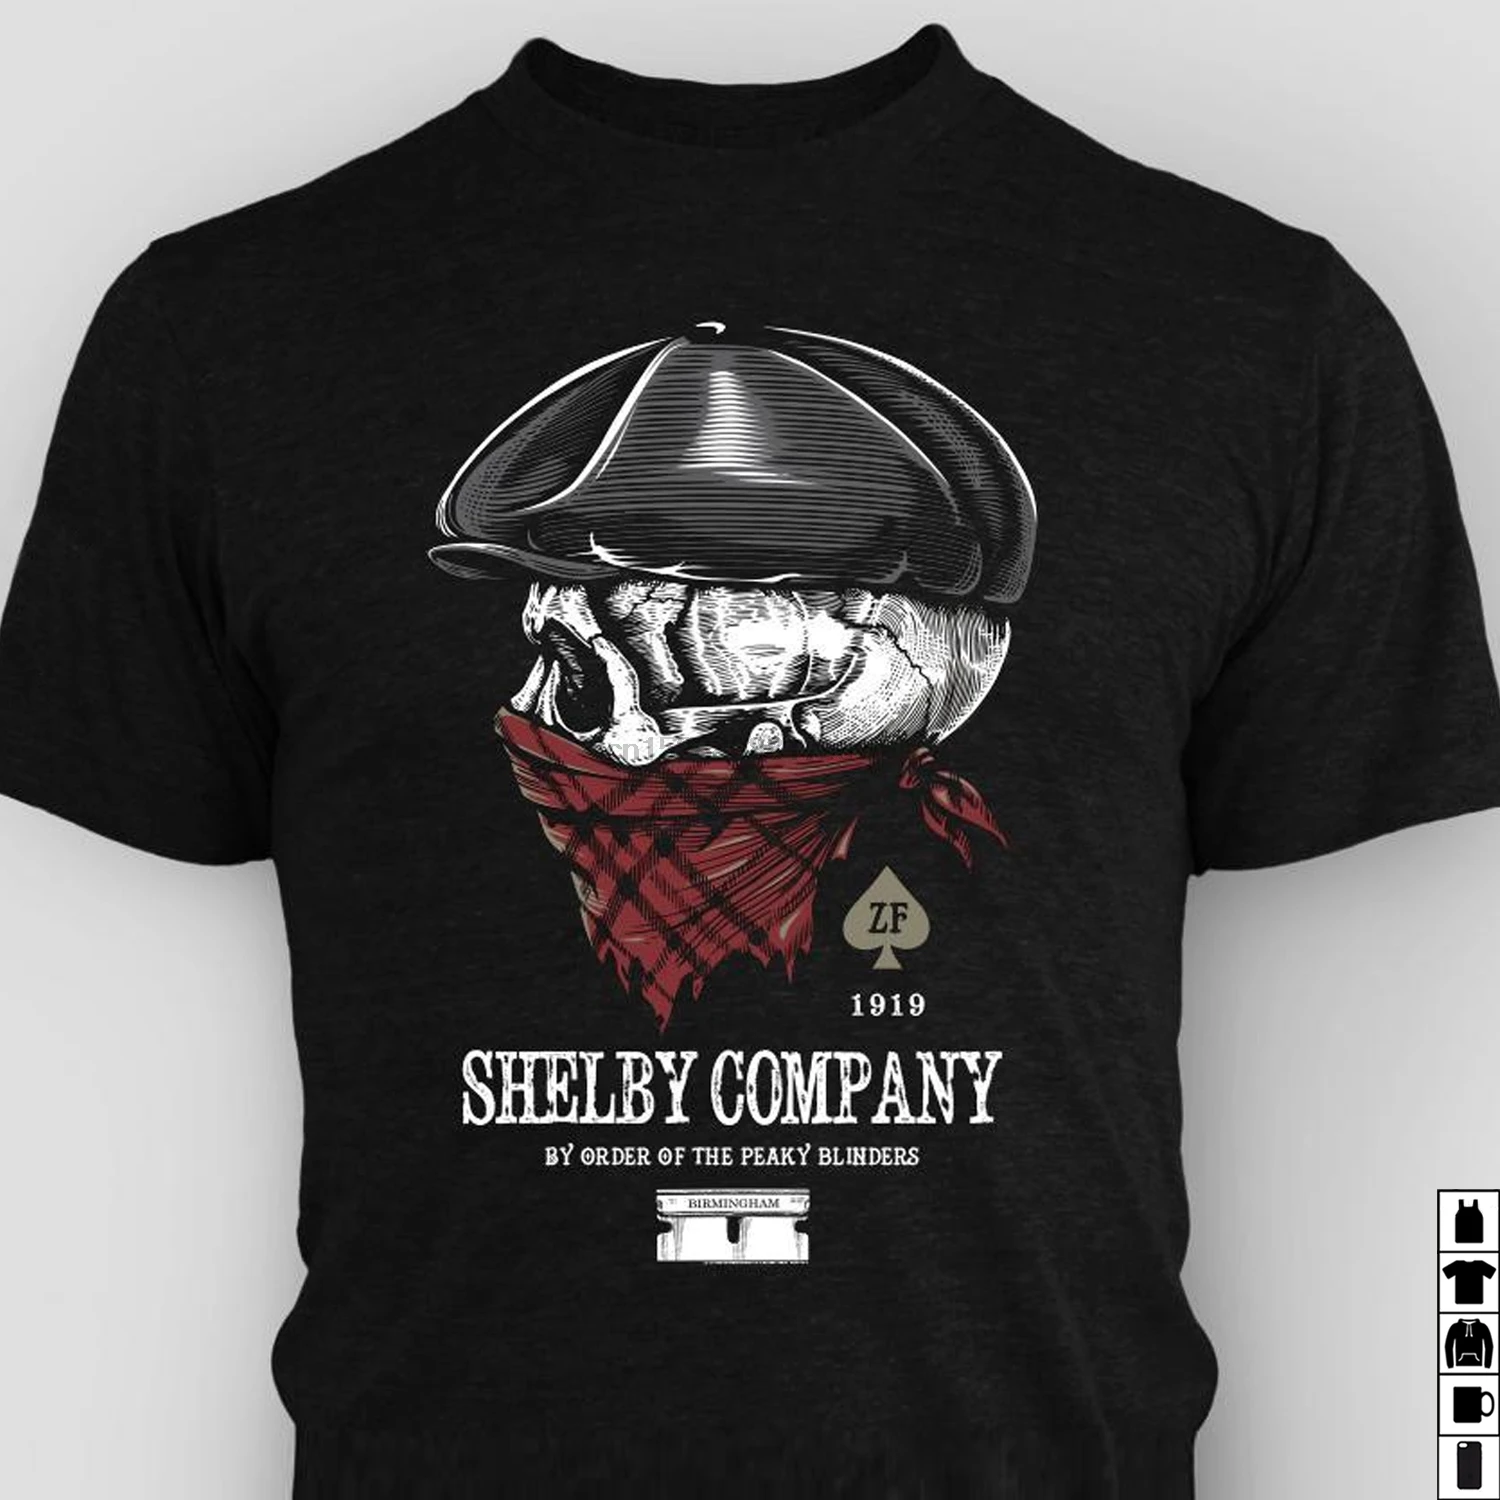 

Shelby Company By Order Of The Peaky Blinders T Shirt Black Cotton Size S-3Xl 2019 Unisex Tees